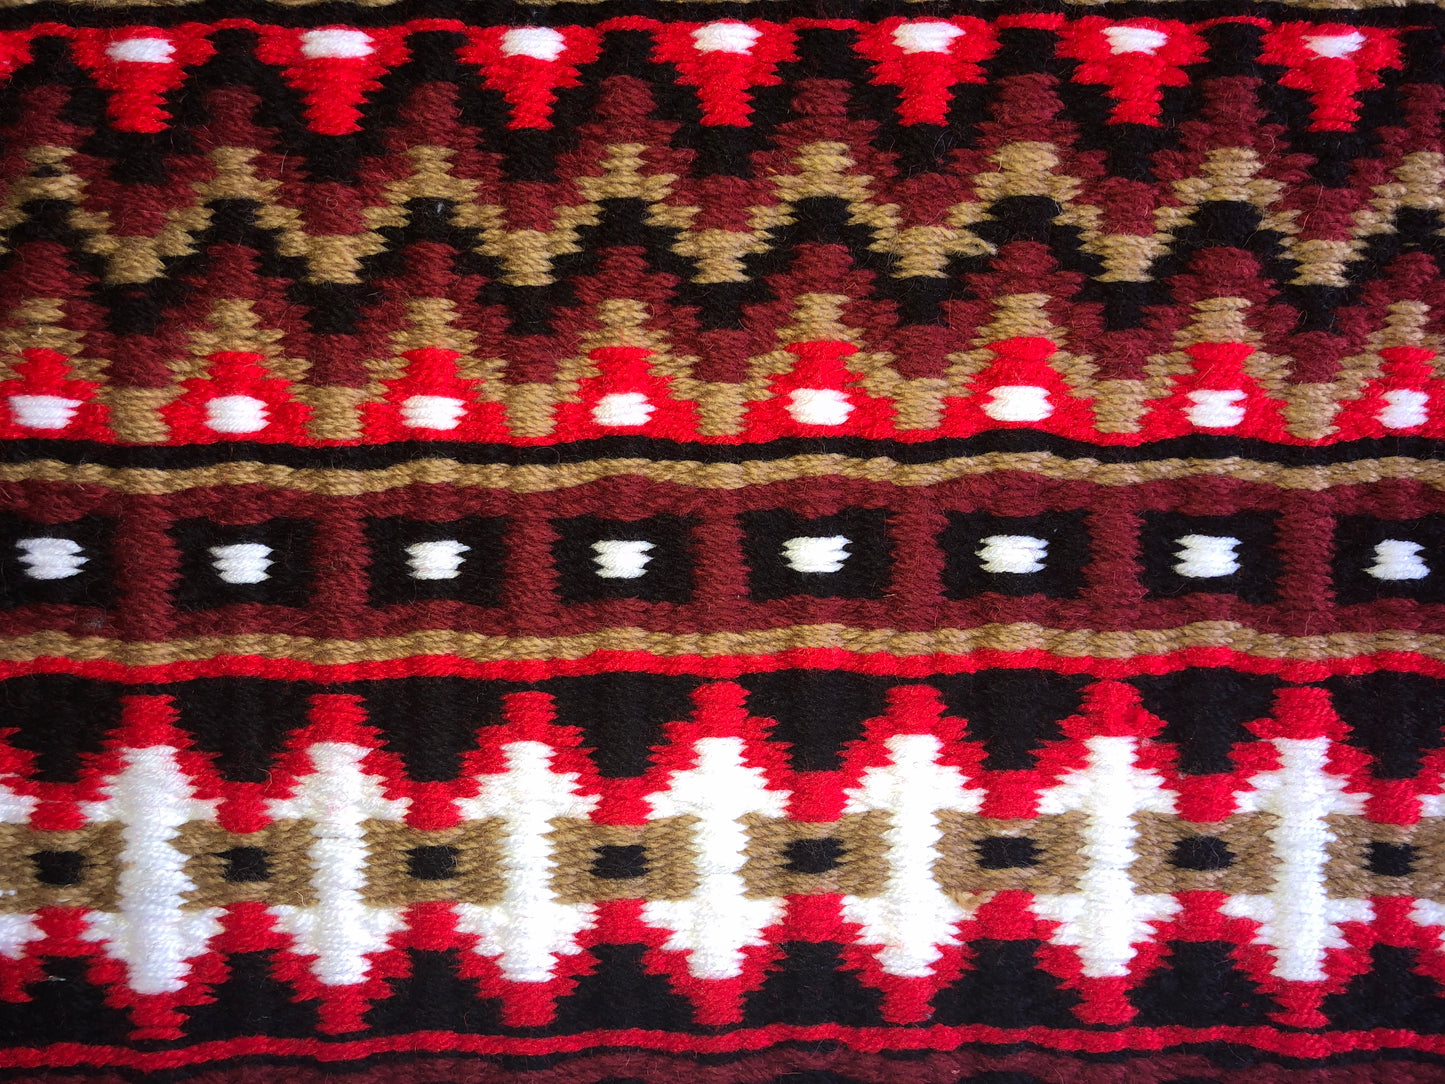 Show Pad 1966 - Black base with bright red, dark red, tan and white